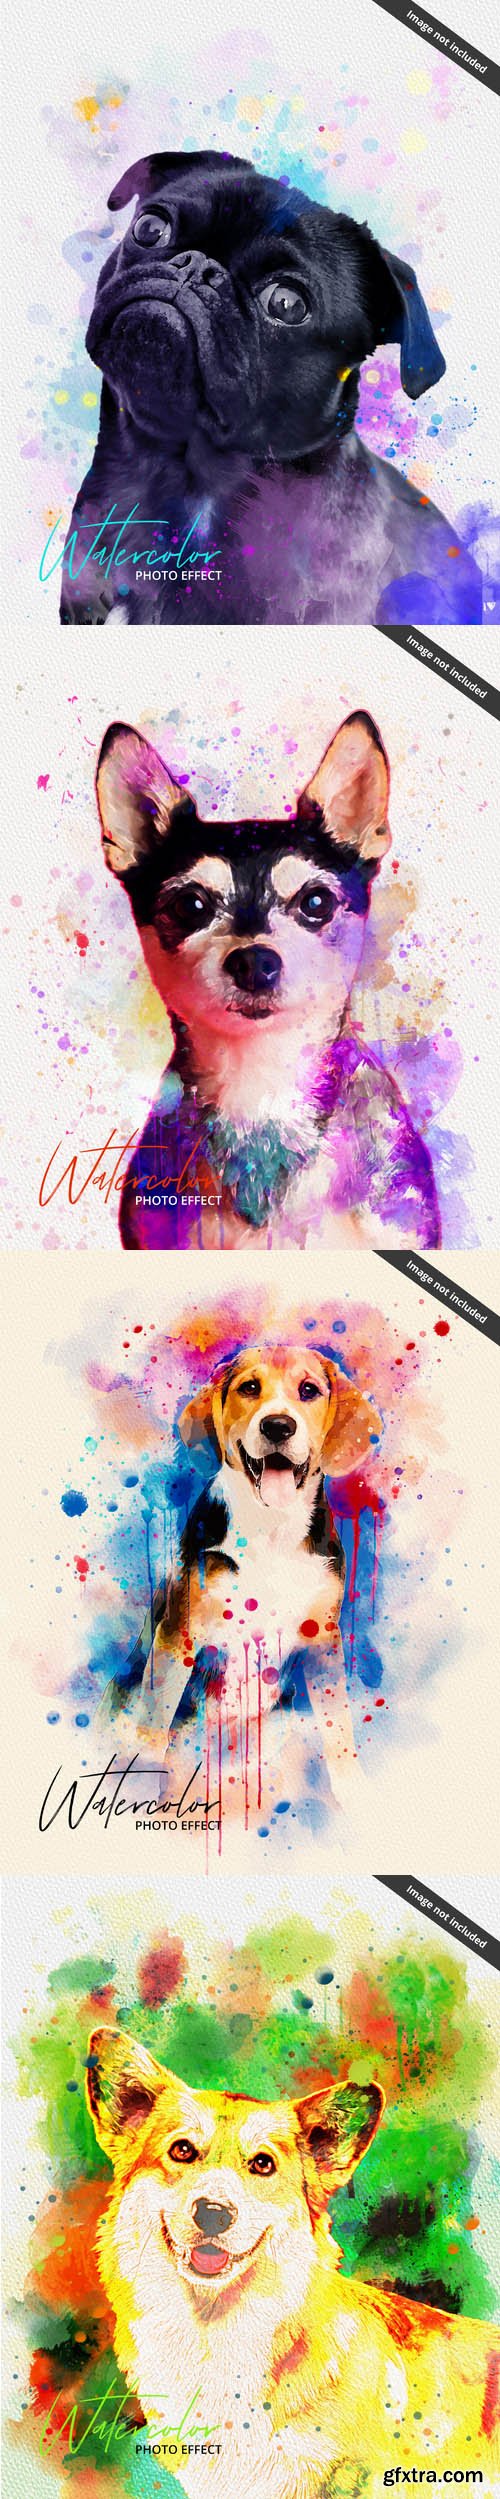 Watercolor painting of a dog photo effect 6